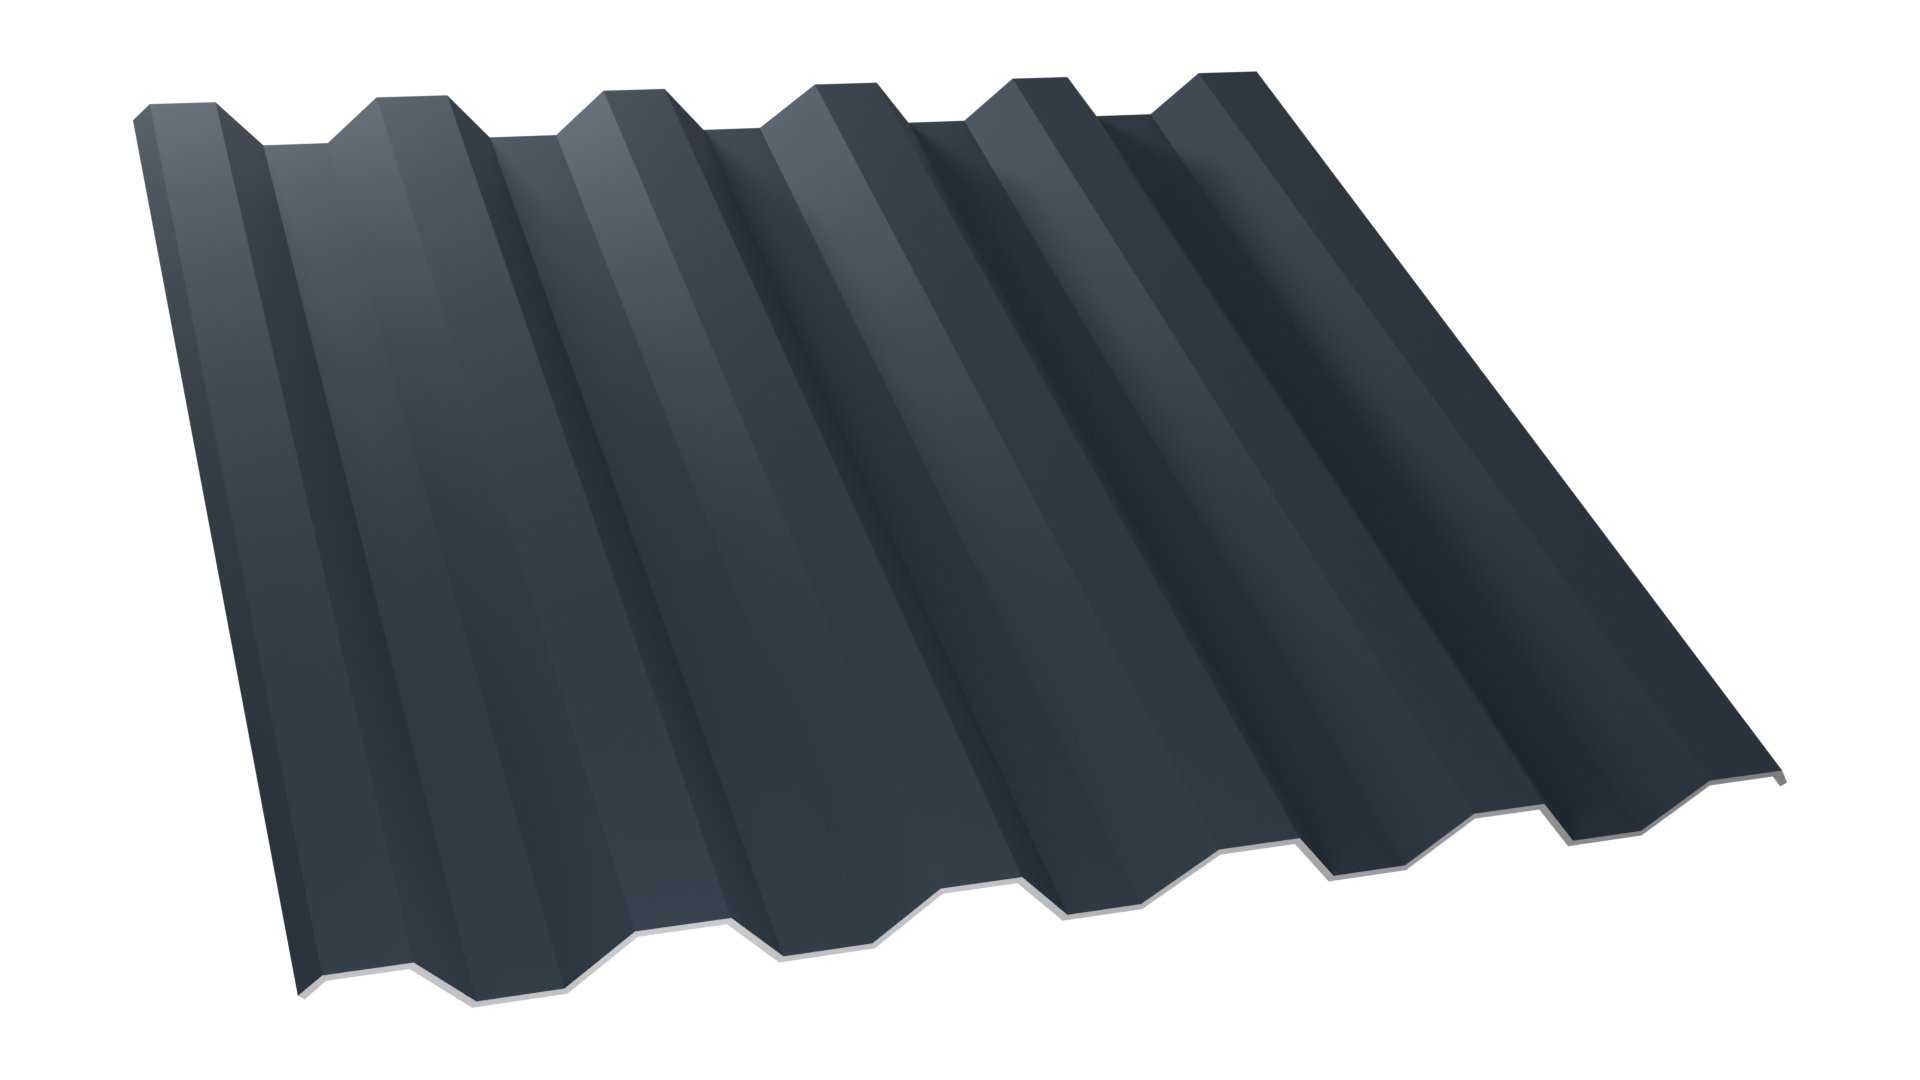 Ultra Rib Corrugated Metal Panels for Roofing and Siding